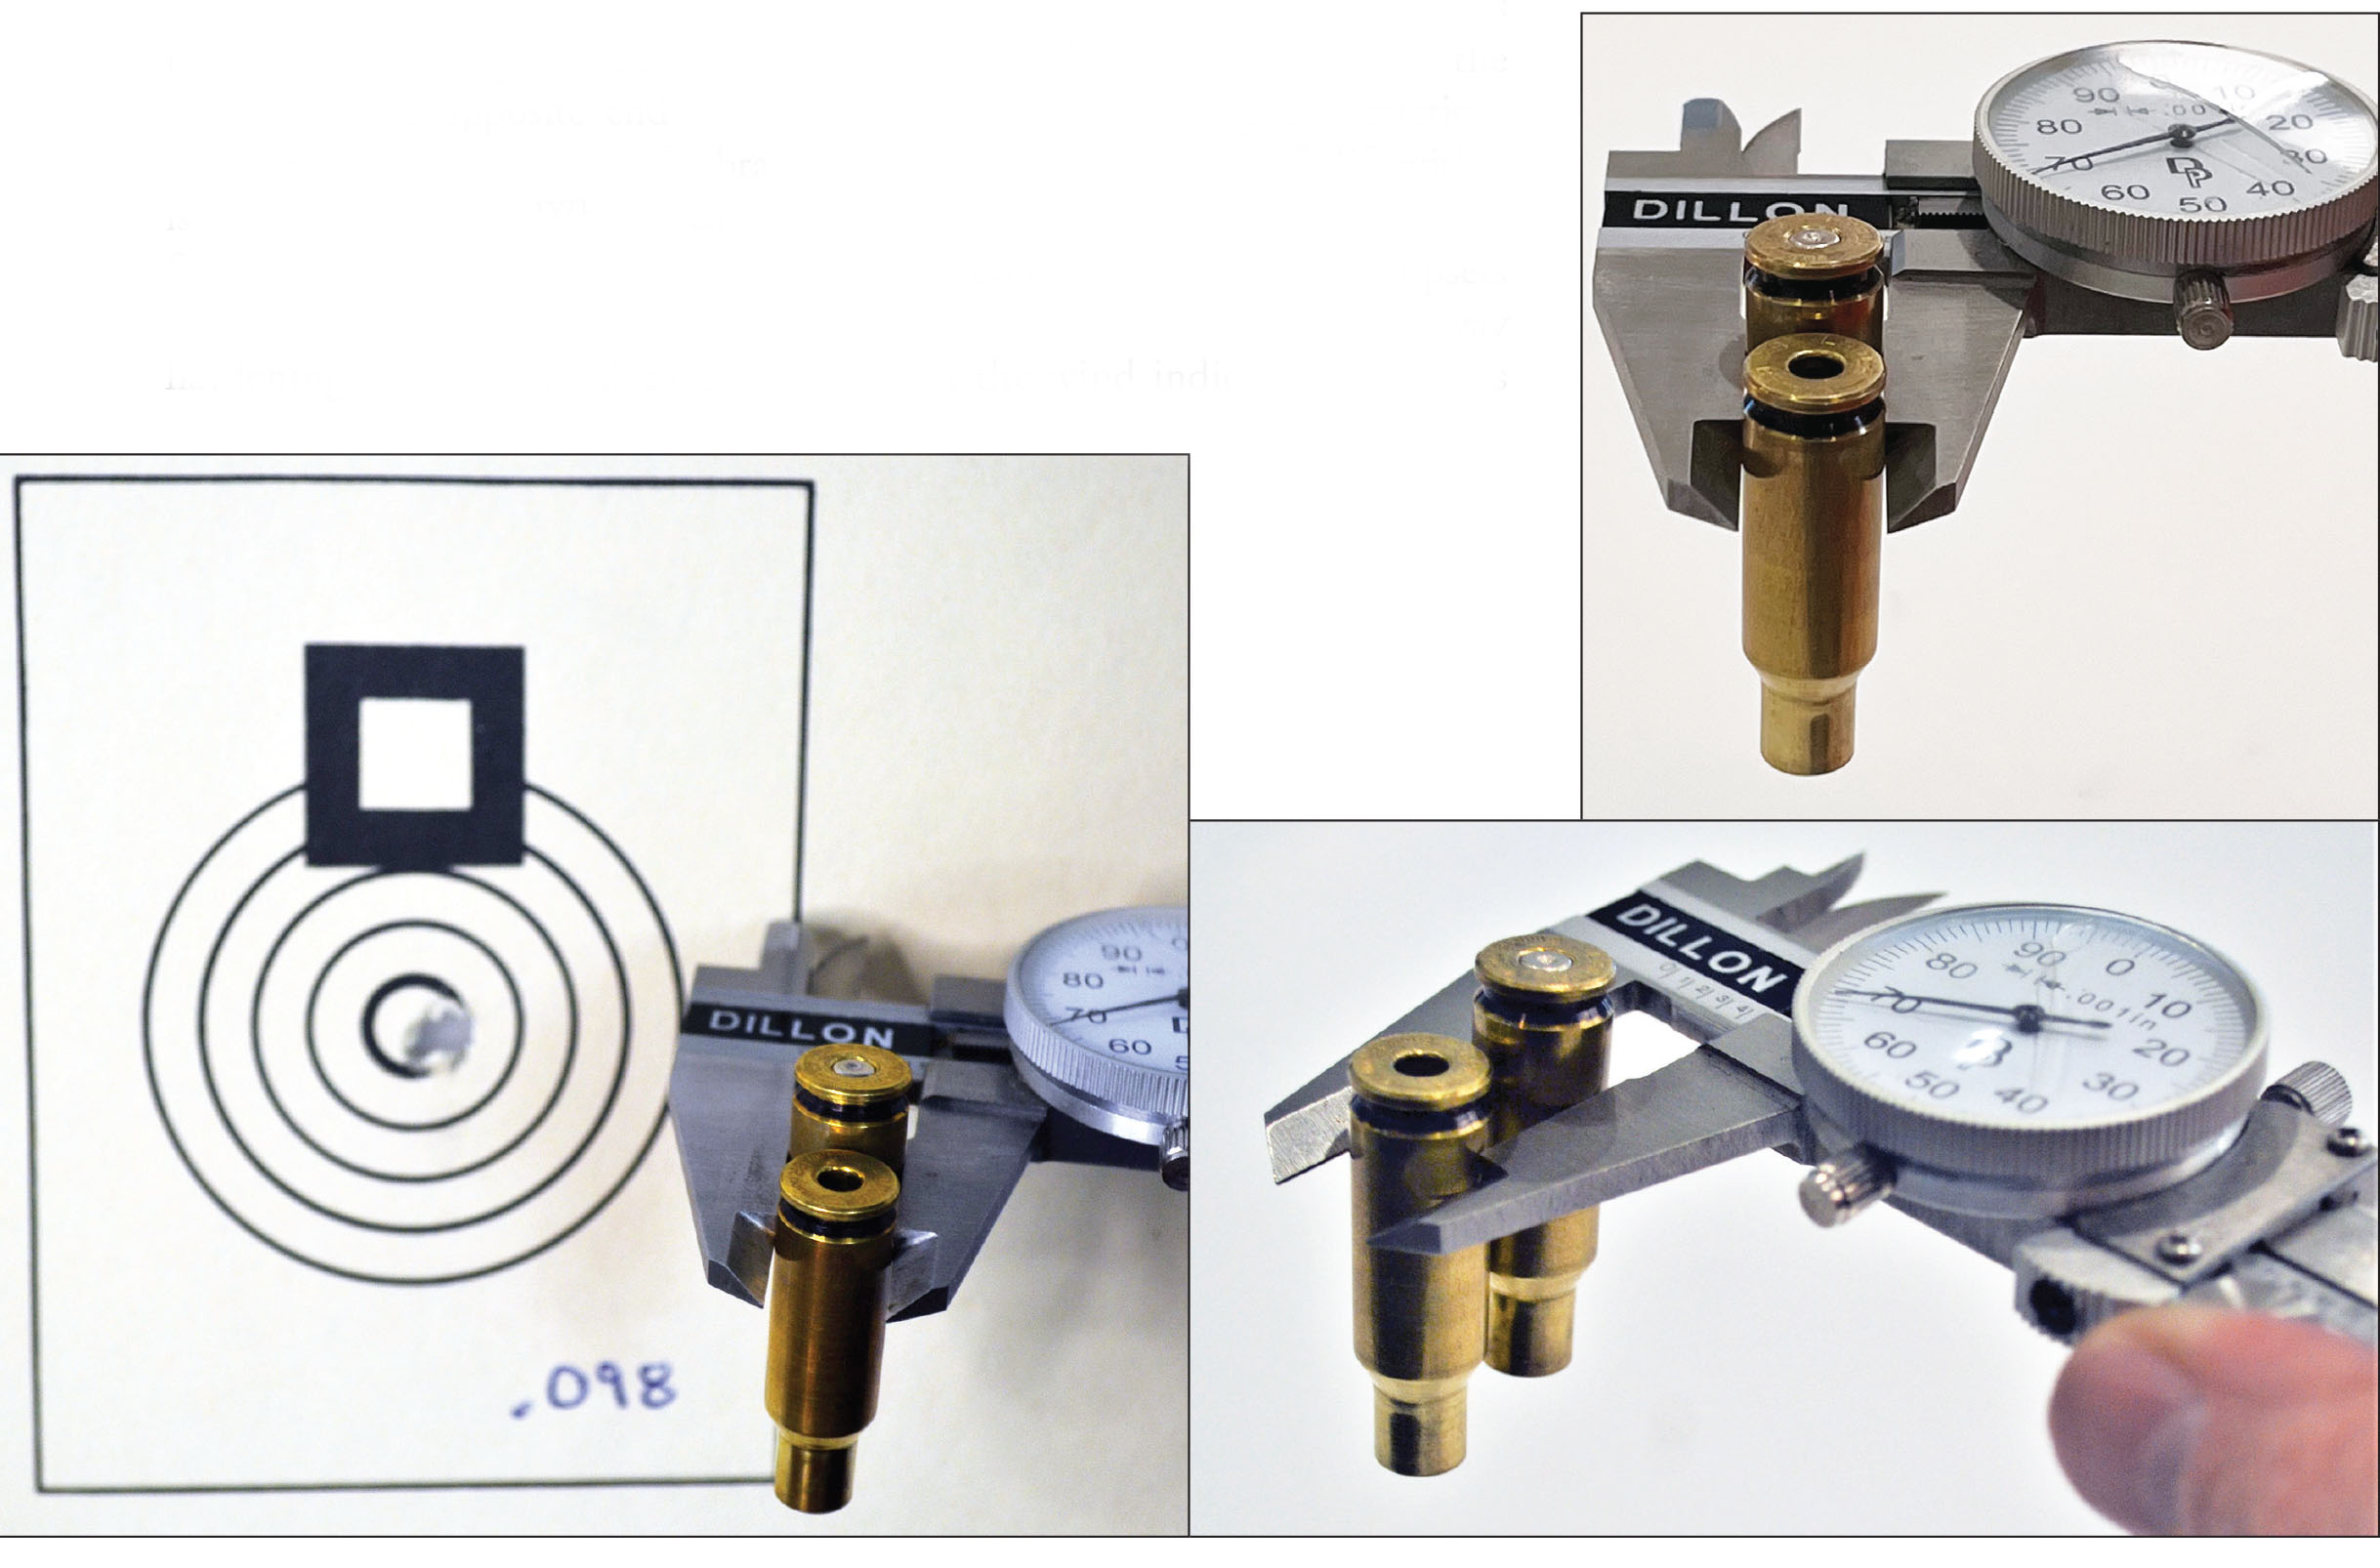 The “quick check” method used by Jim Carstensen of JLC Precision from proper base resizing.